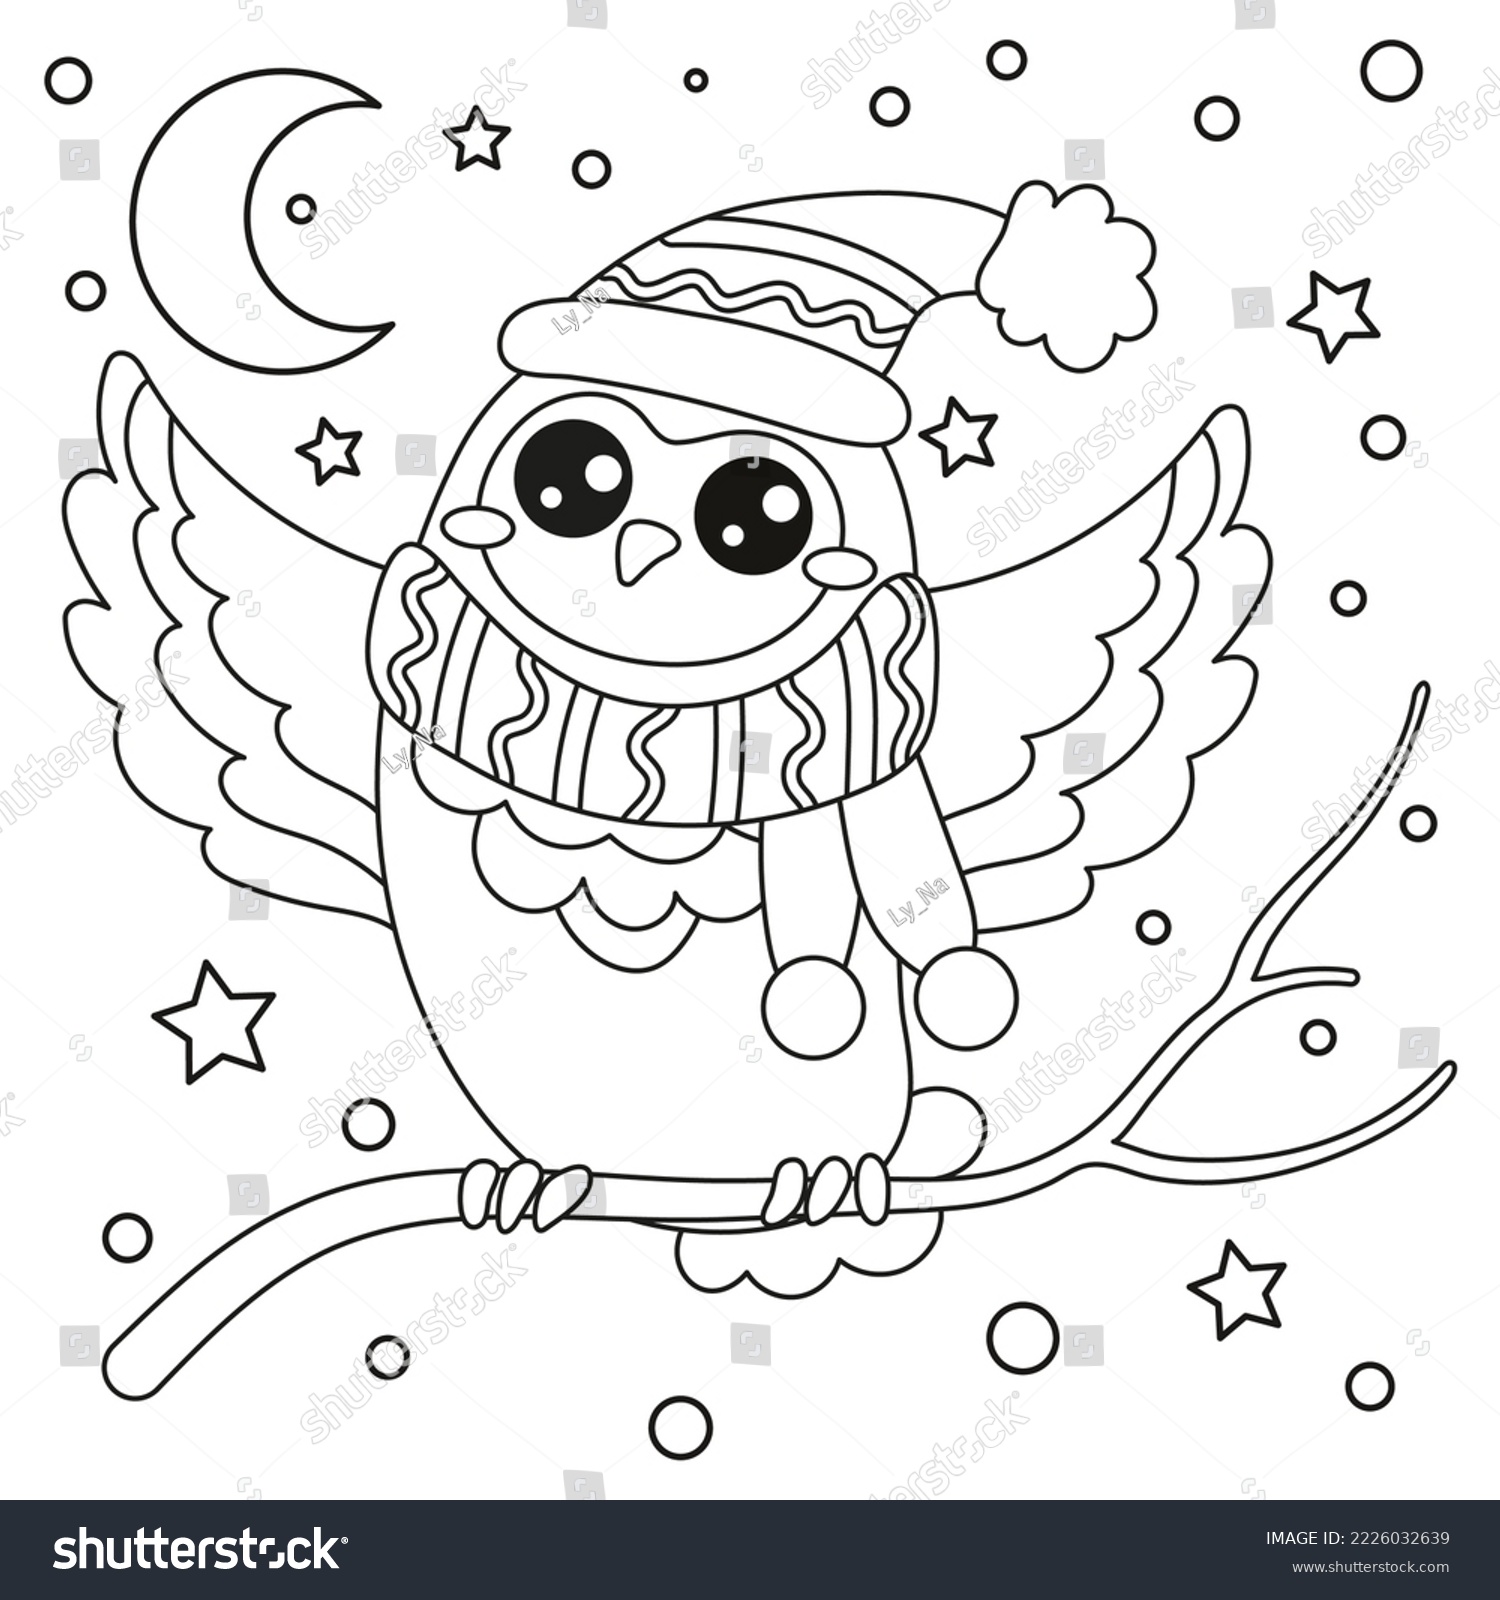 Owl christmas coloring pages over royalty